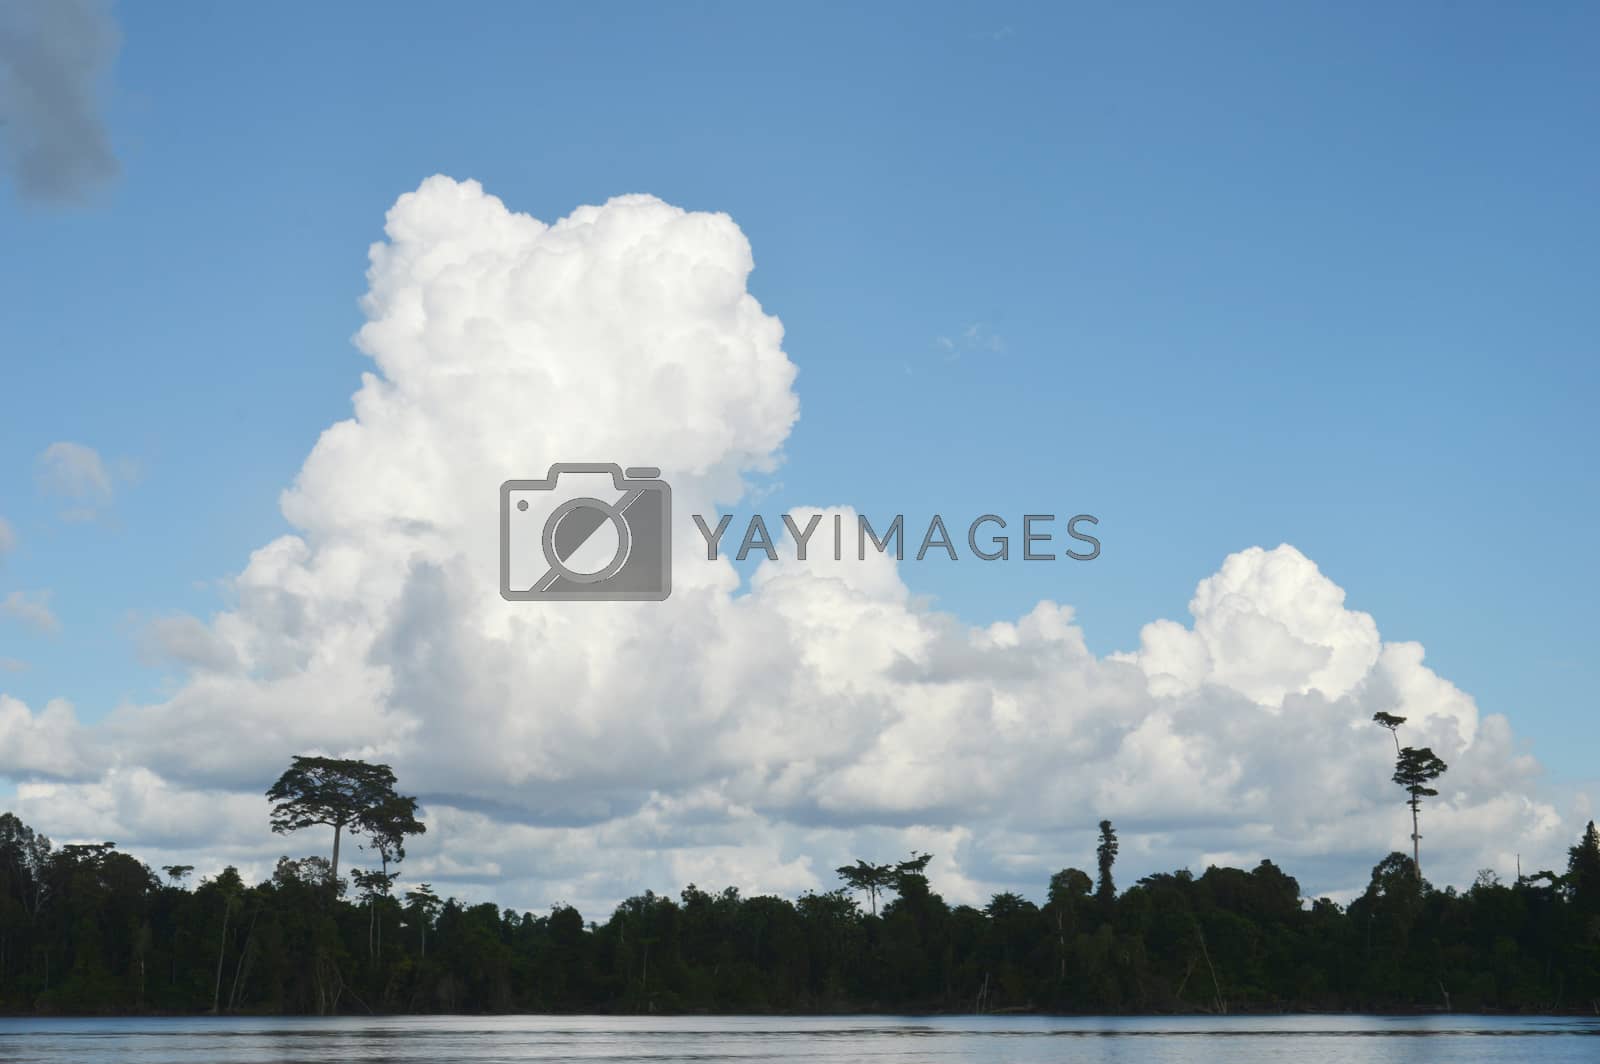 Royalty free image of white clouds by antonihalim